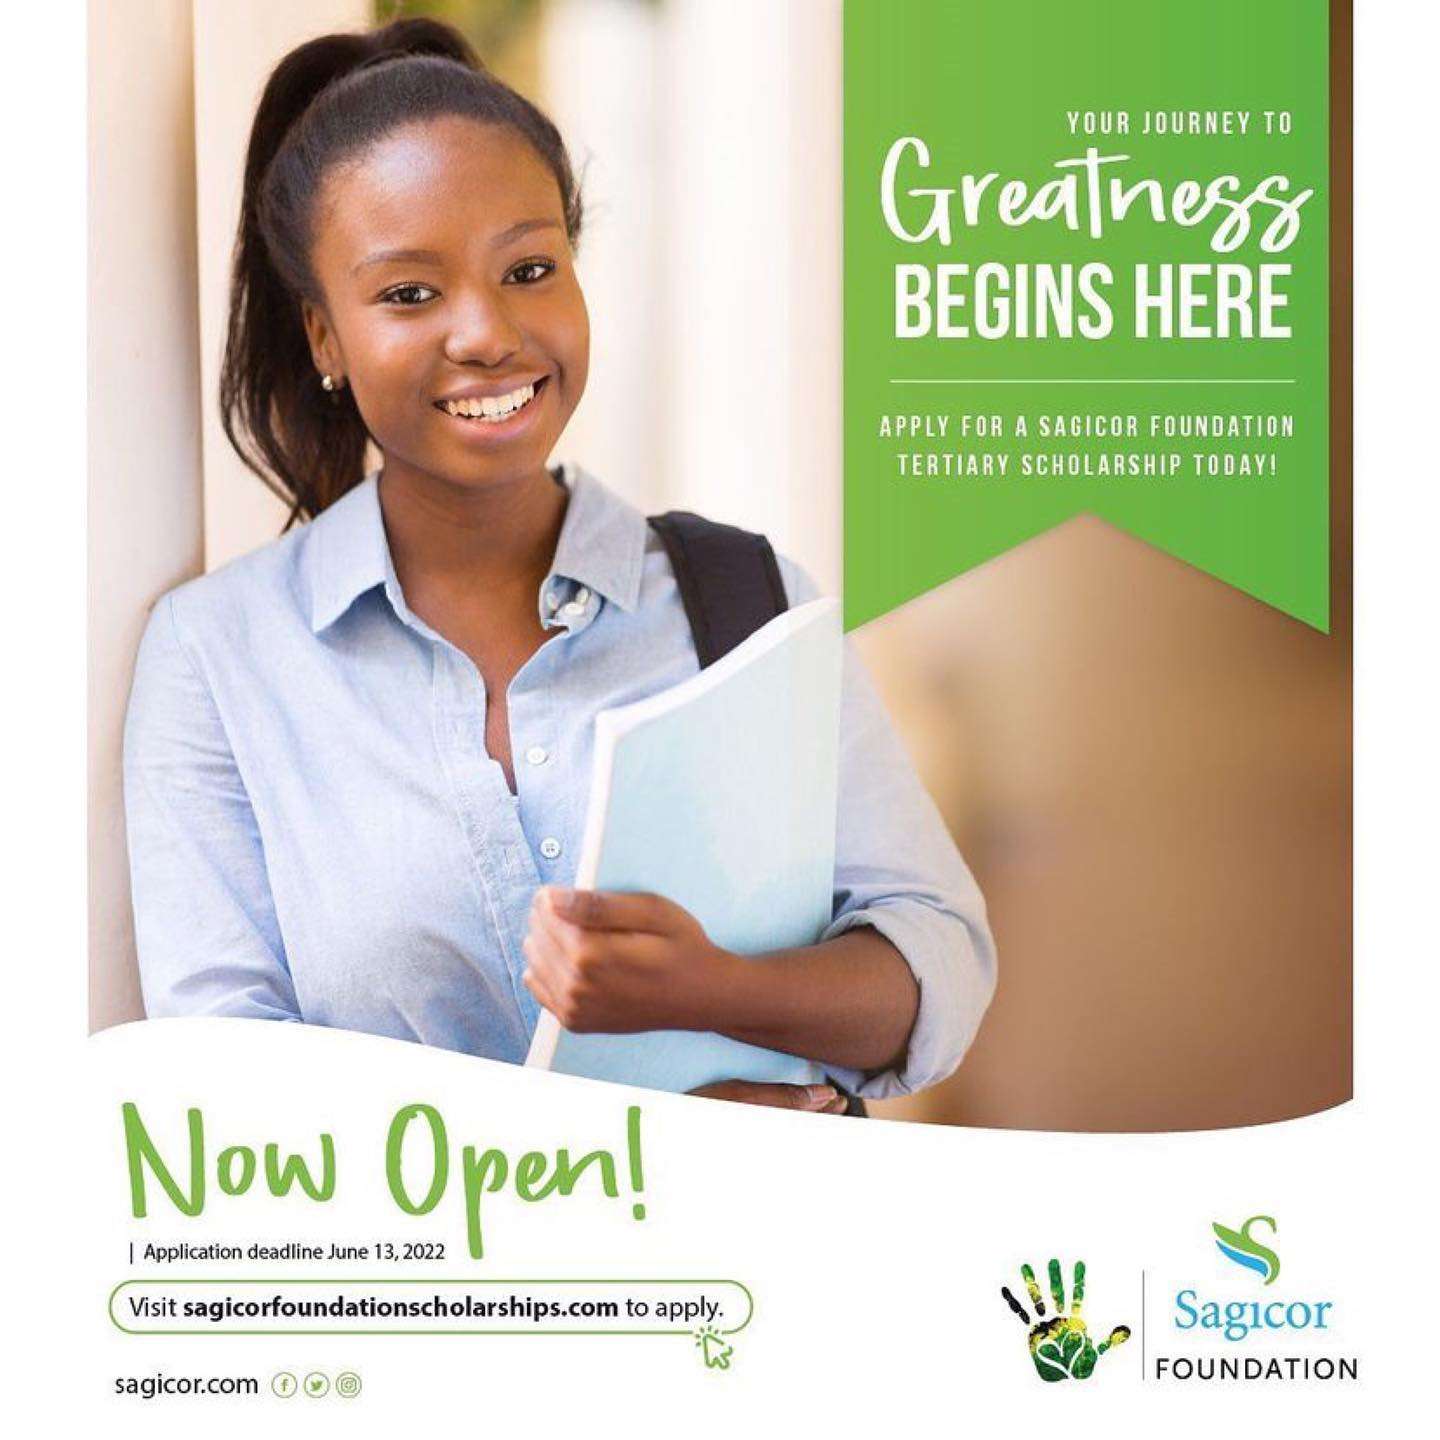 The Sagicor Foundation scholarship is inviting applicants to apply for their annual tertiary scholarships by June 13. There are at least seven (7) full scholarships valued at J$250,000 per year for up to four (4) years open to qualified students at the CMU, UWI, NCU, UCC, UTech, and EMCVPA. 